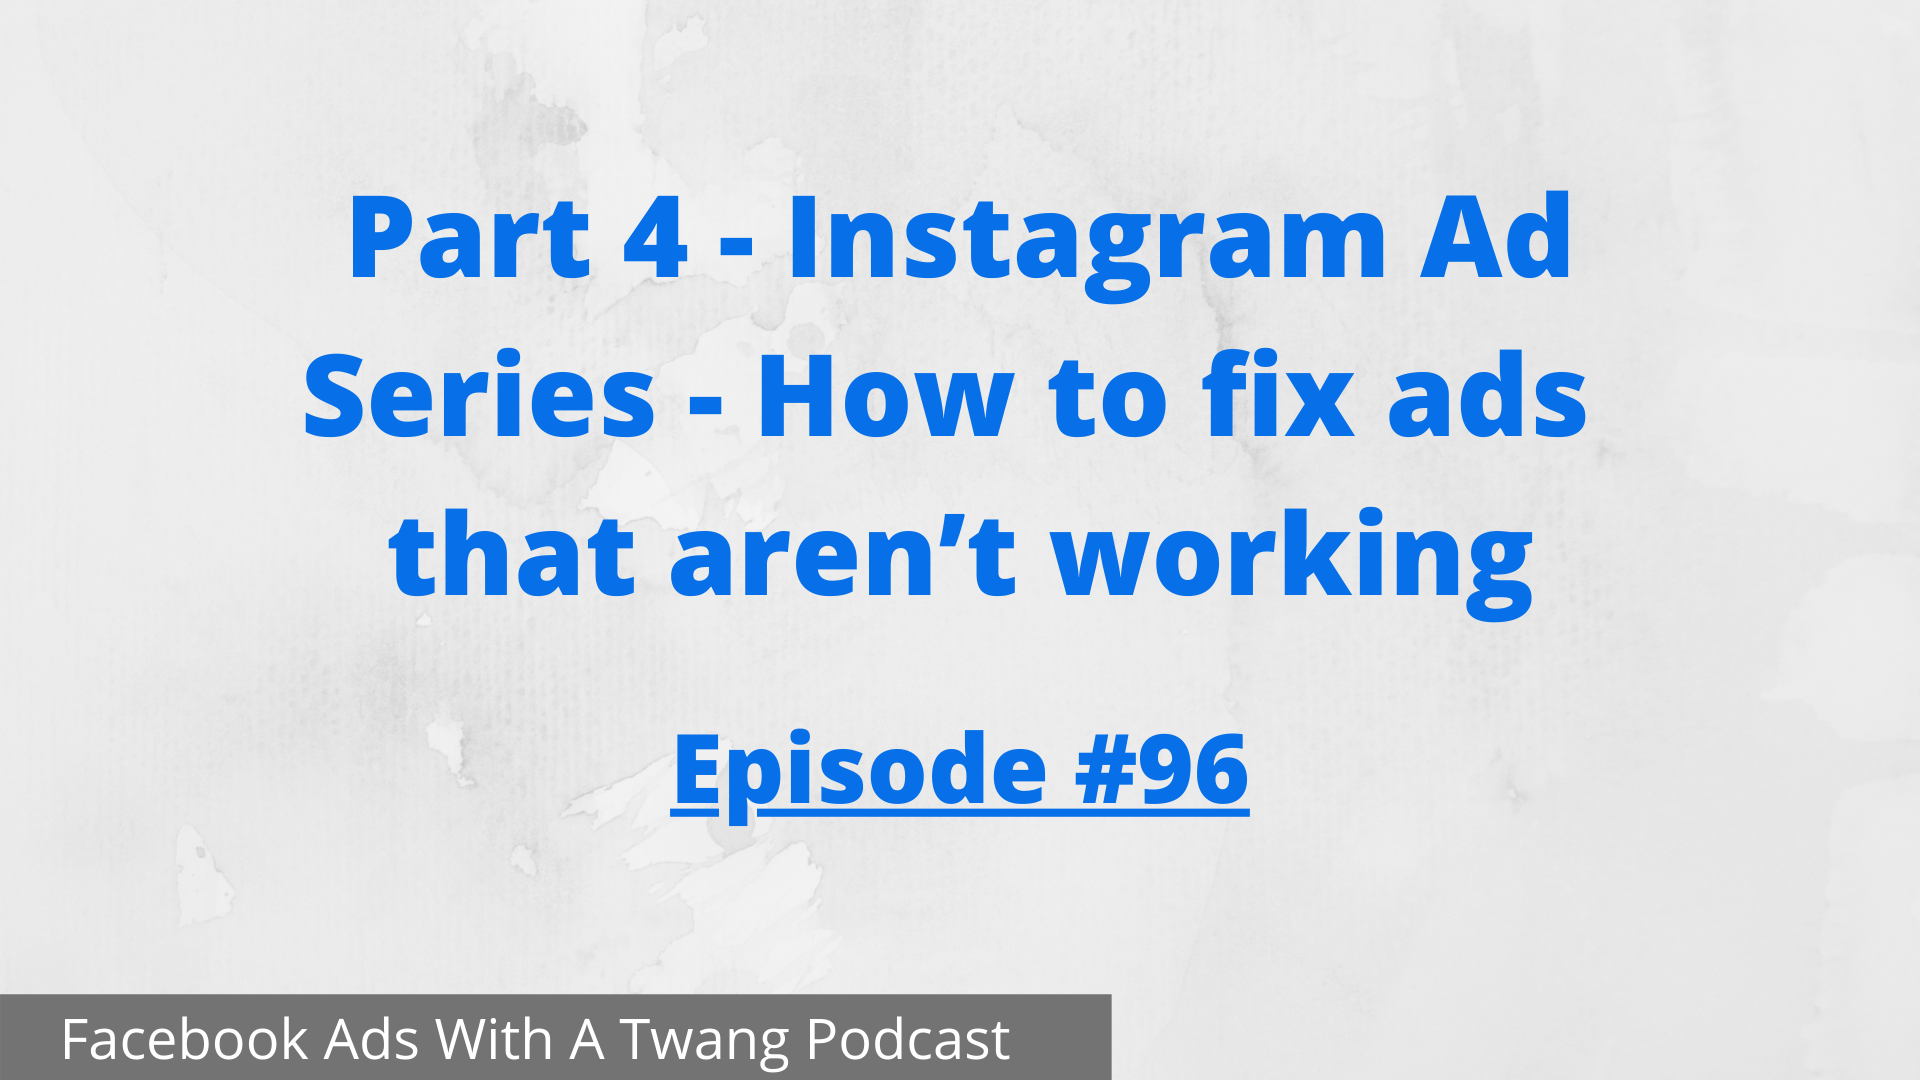 Part 4 - Instagram Ad Series - How to fix ads that aren’t working